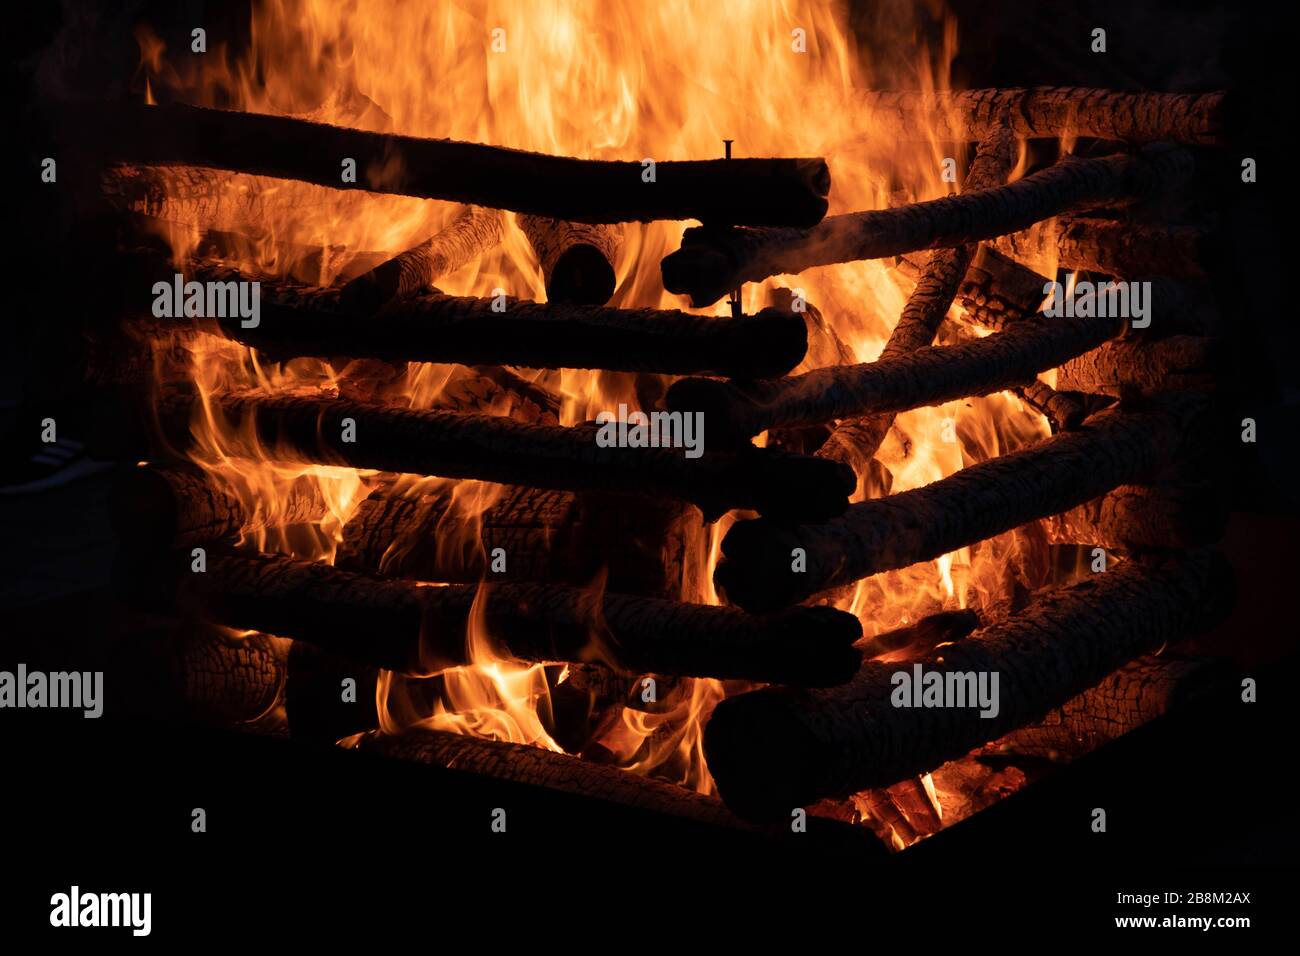 Fire and flames, bonfire in a traditional festival Stock Photo